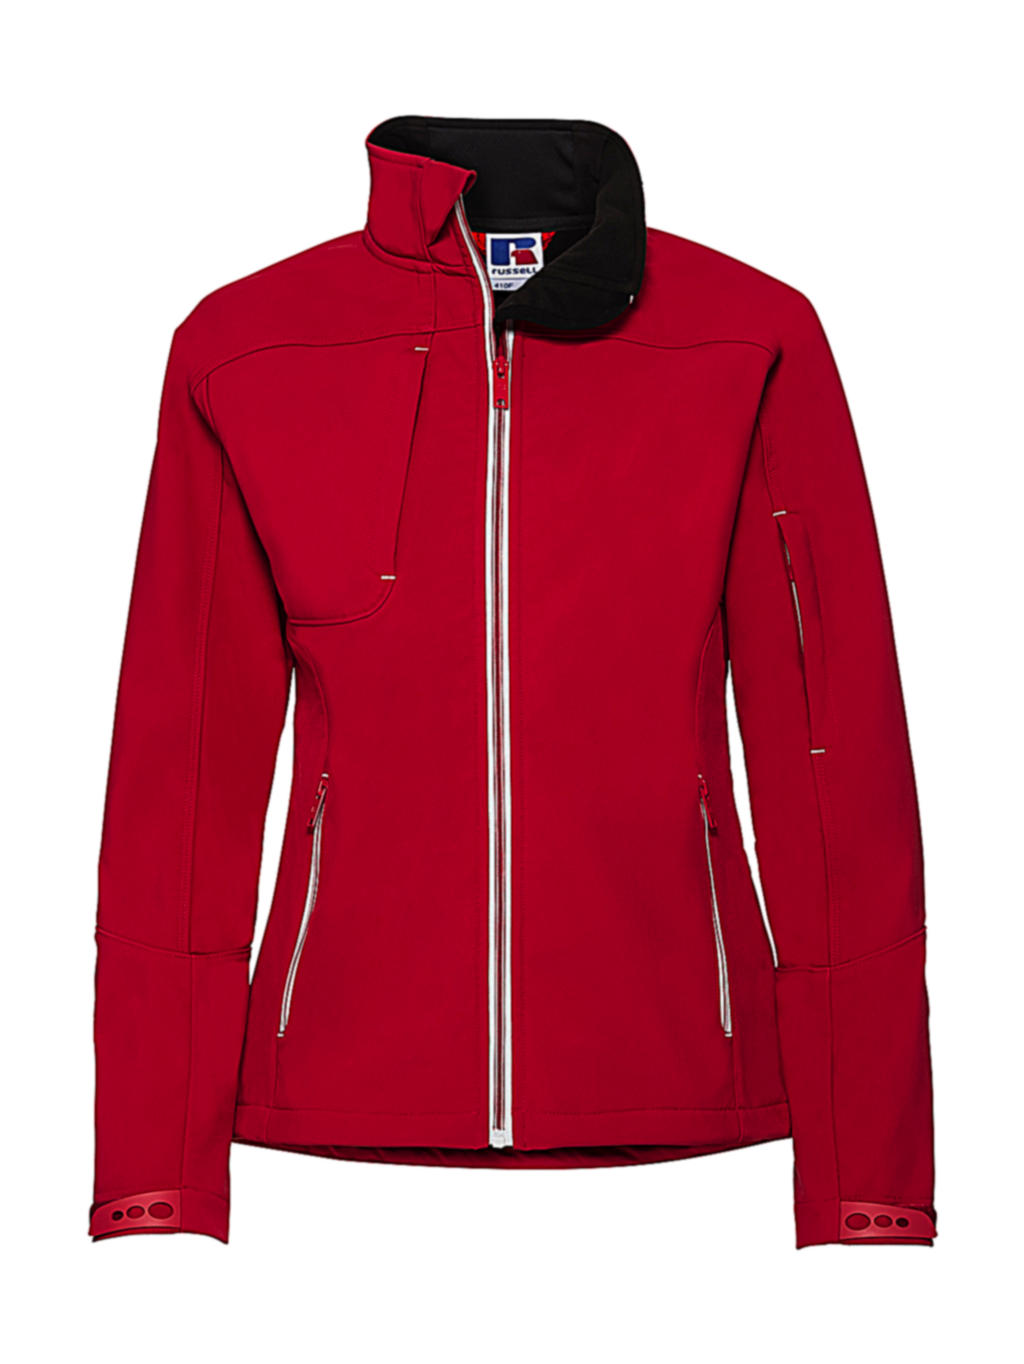  Ladies Bionic Softshell Jacket in Farbe Classic Red